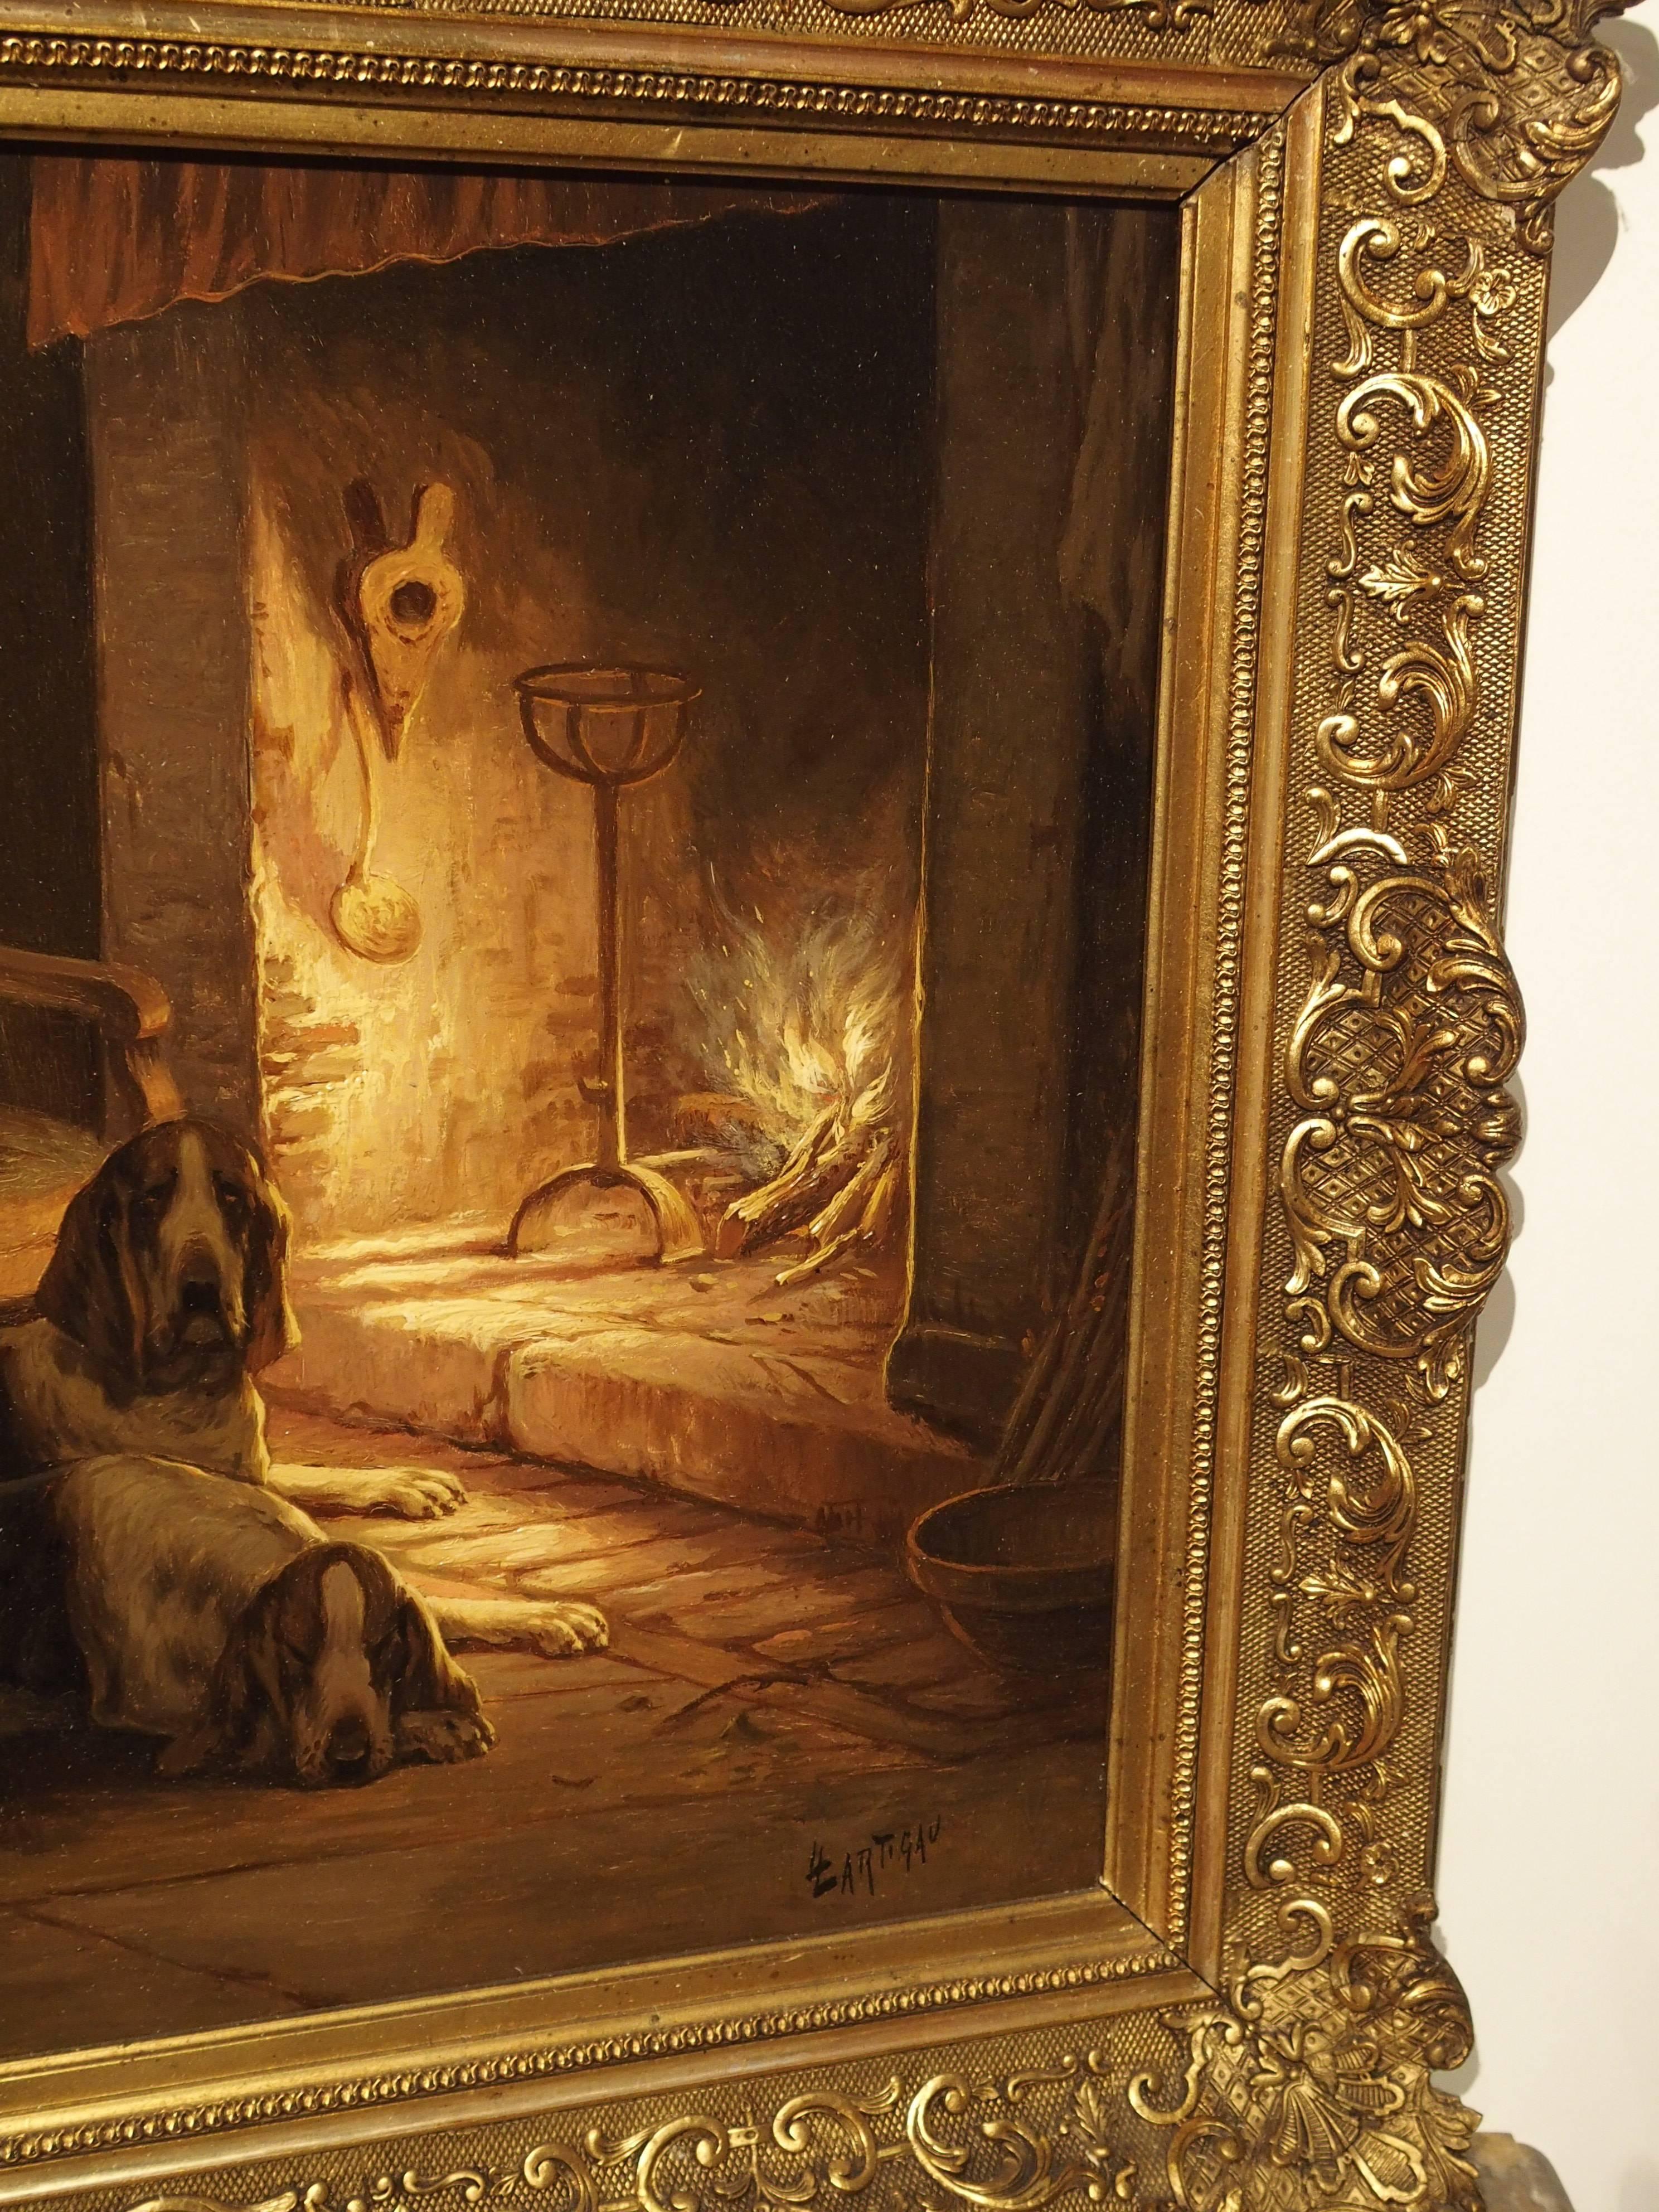 This fabulous antique French oil on canvas depicts a cozy interior scene with three hunting dogs warming up in front of the fire. The artist’s use of light in this painting is superb. The light coming from the fire in the stone mantel highlights the